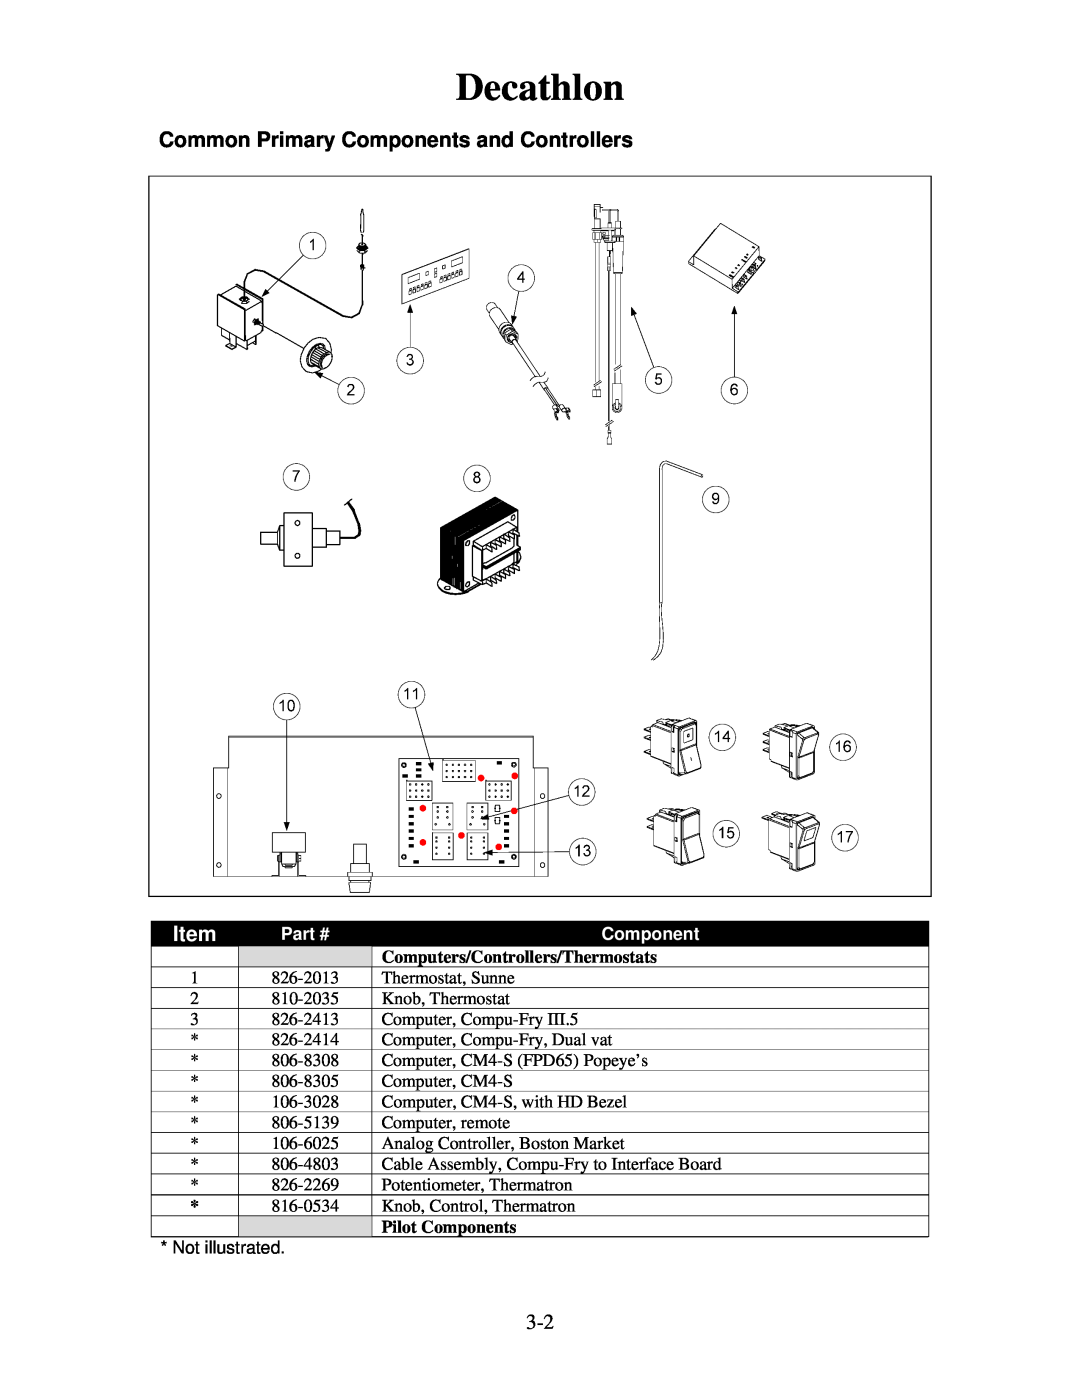 Frymaster 8196321 manual Decathlon, Part #, Computers/Controllers/Thermostats, Pilot Components 